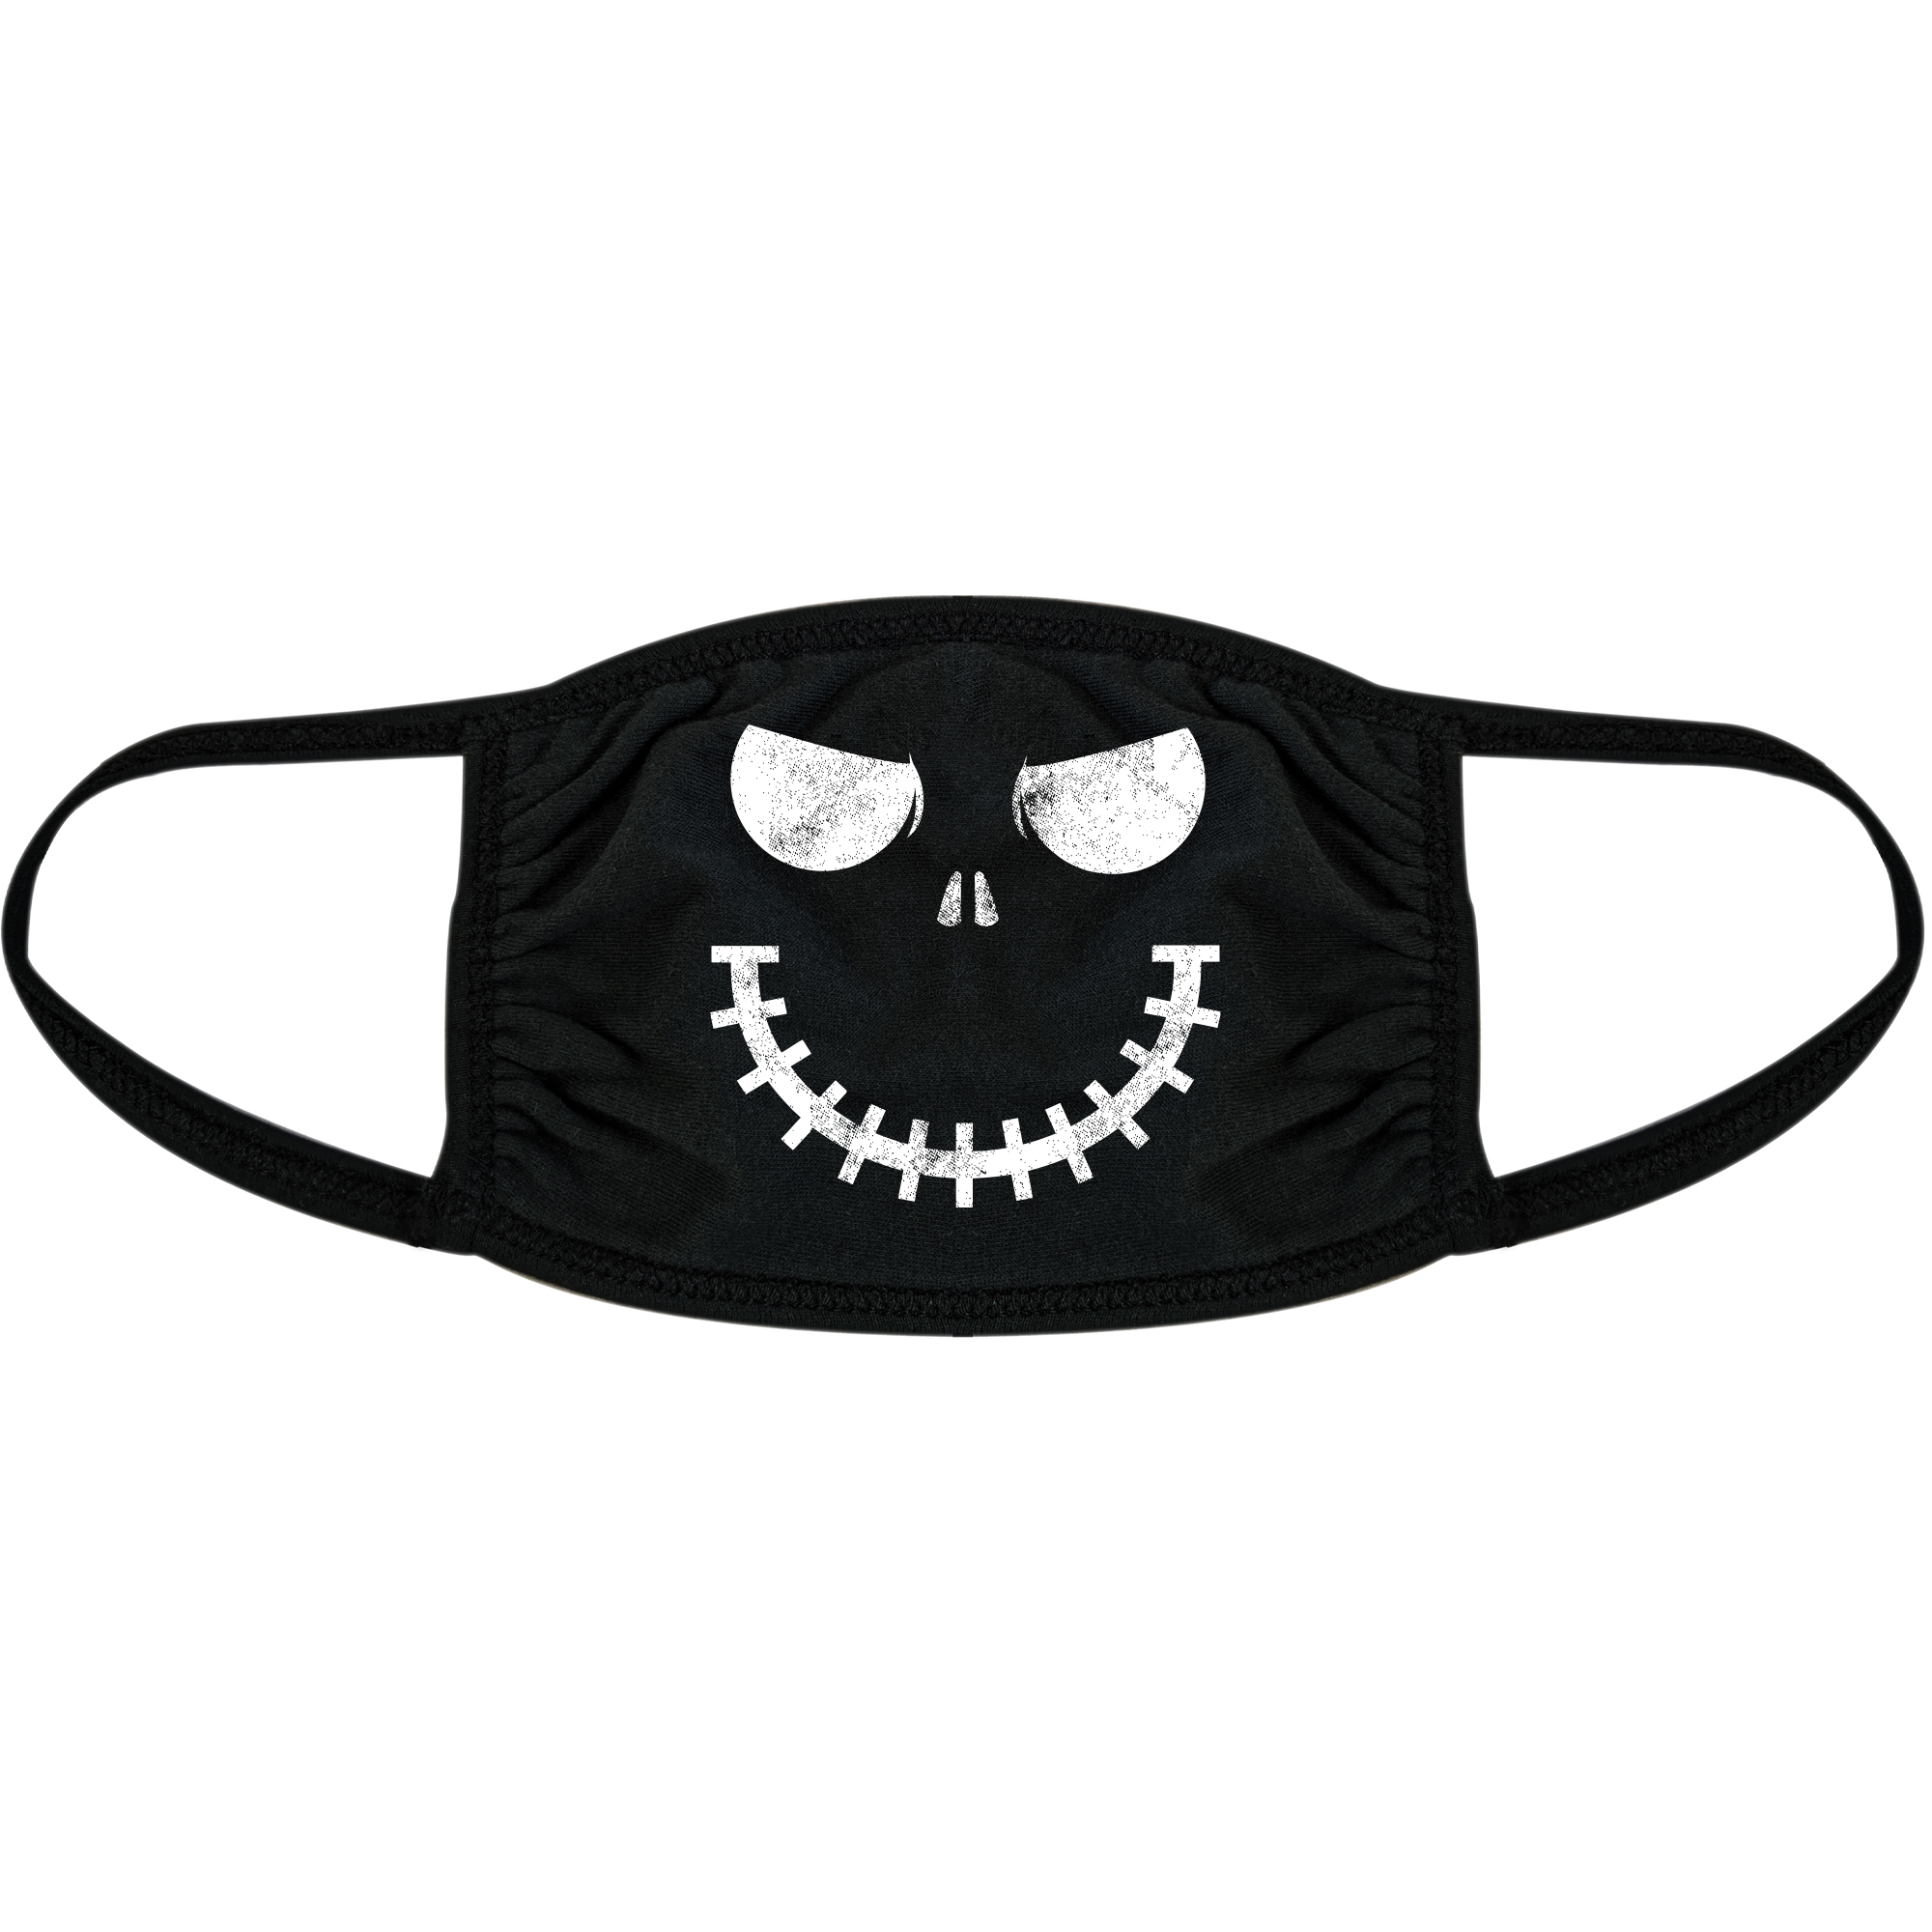 Skeleton Zipper Face Mask Funny Halloween Skull Graphic Novelty Nose And Mouth Covering - image 1 of 6